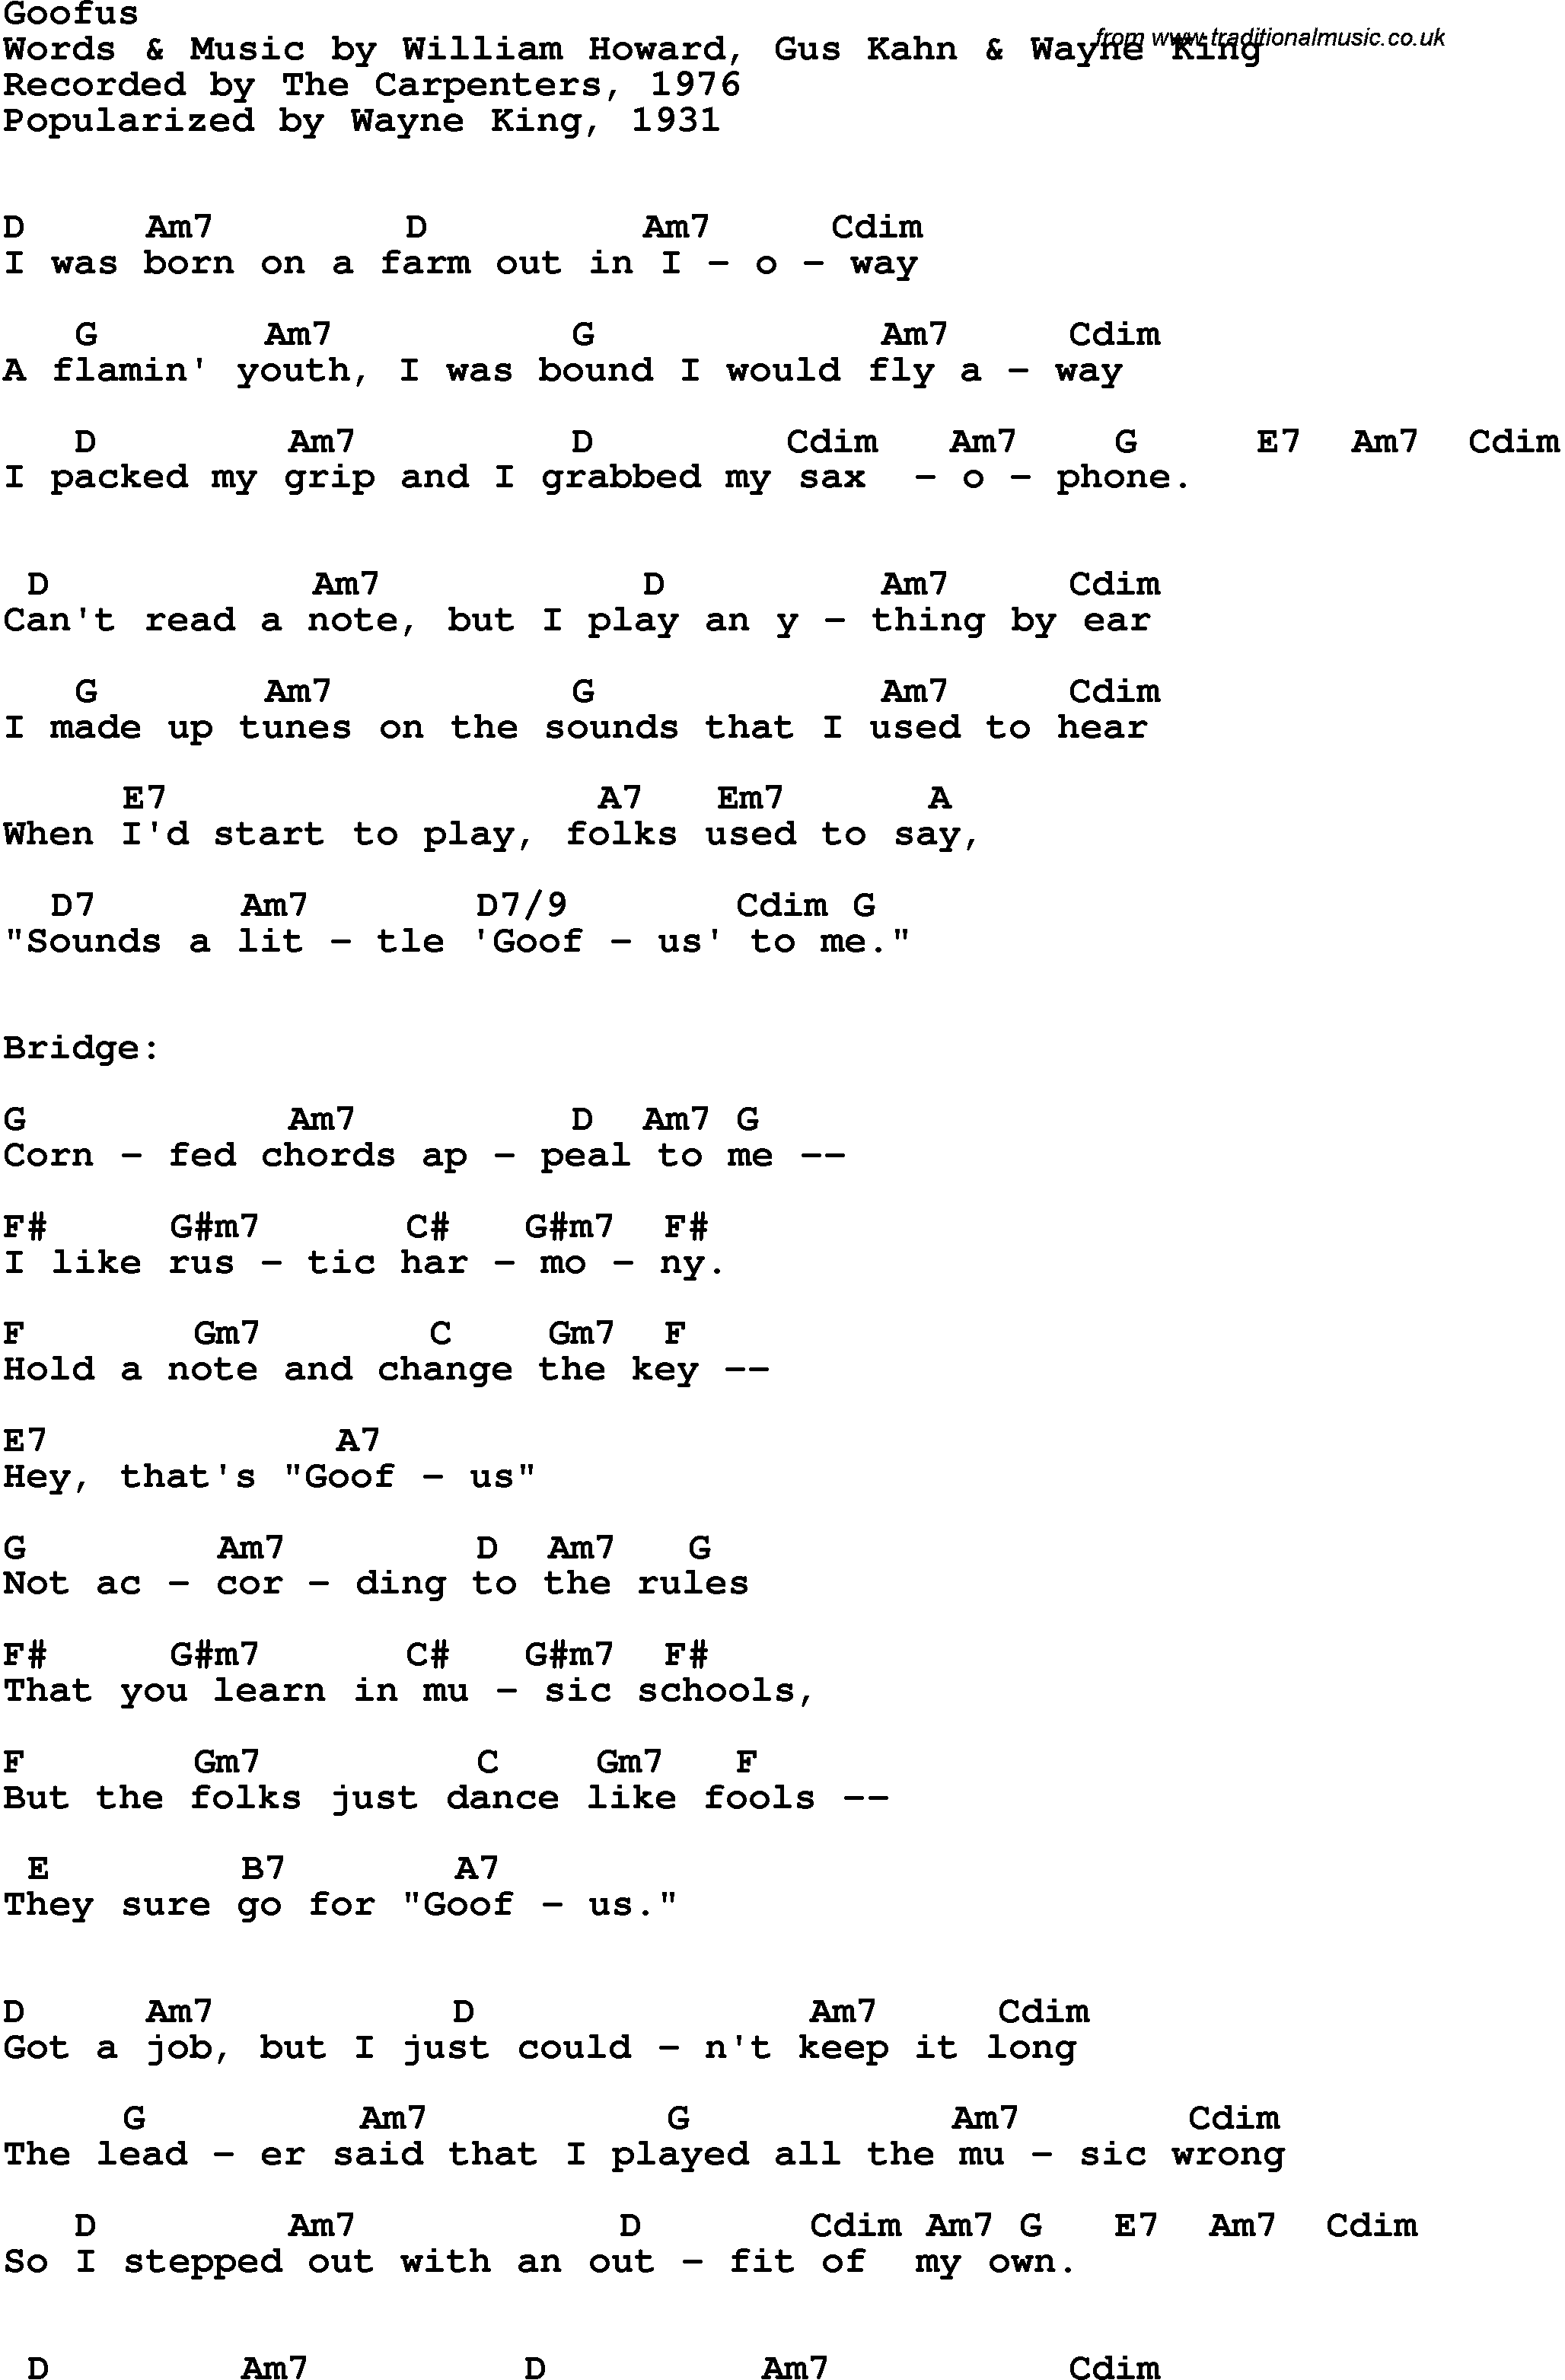 Song Lyrics with guitar chords for Goofus - The Carpenters, 1976